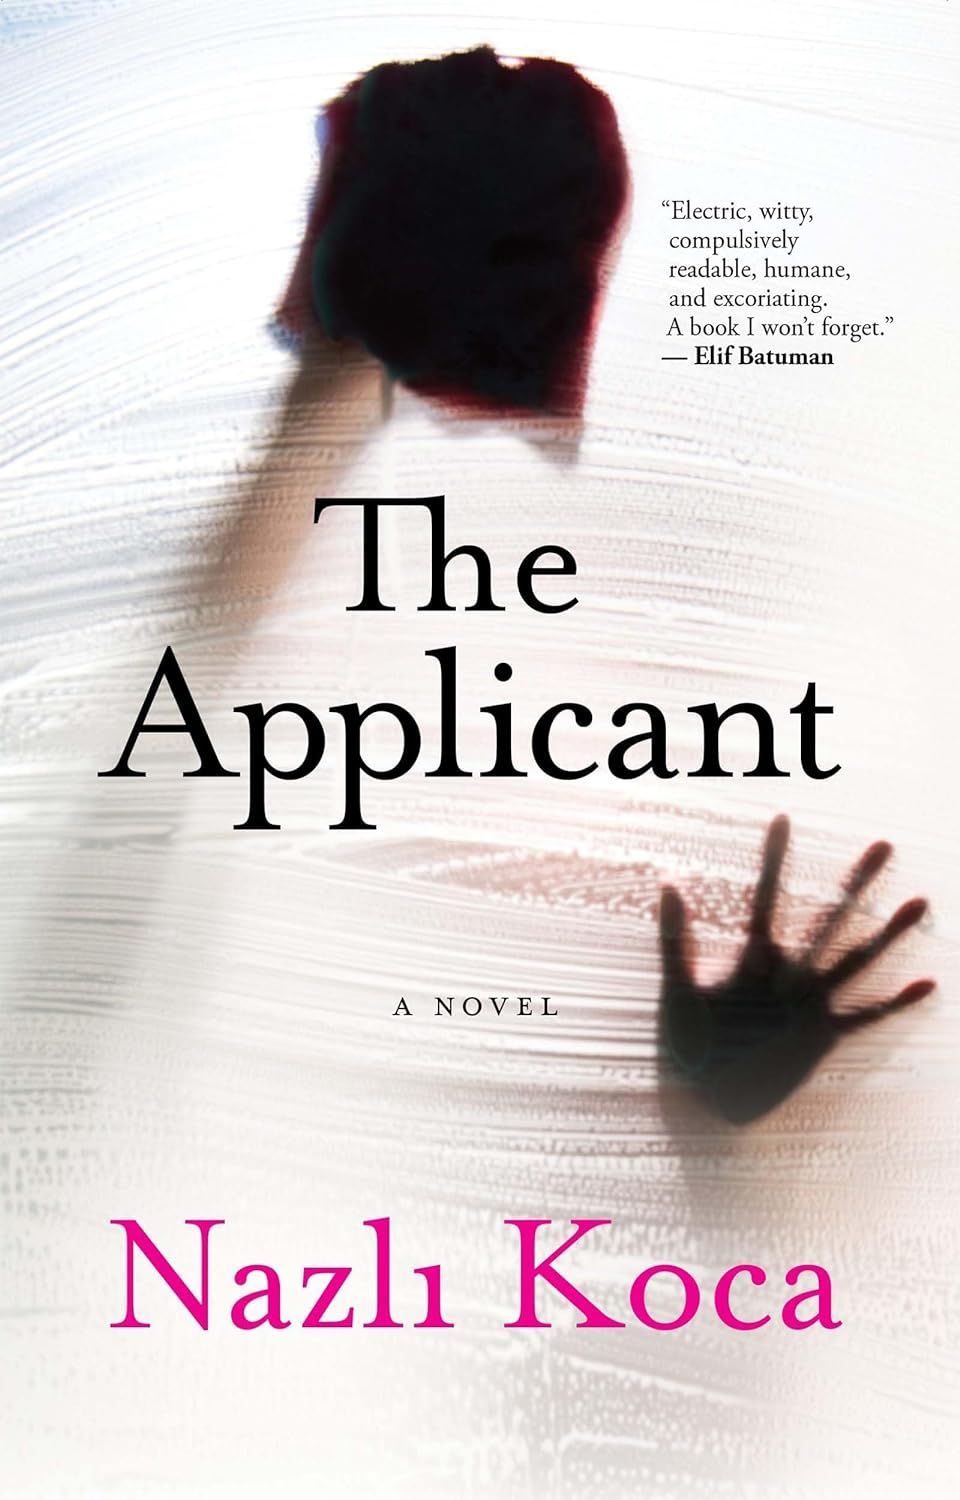 Whatever I Can Have, Nothing I Want: On Nazlı Koca’s “The Applicant”